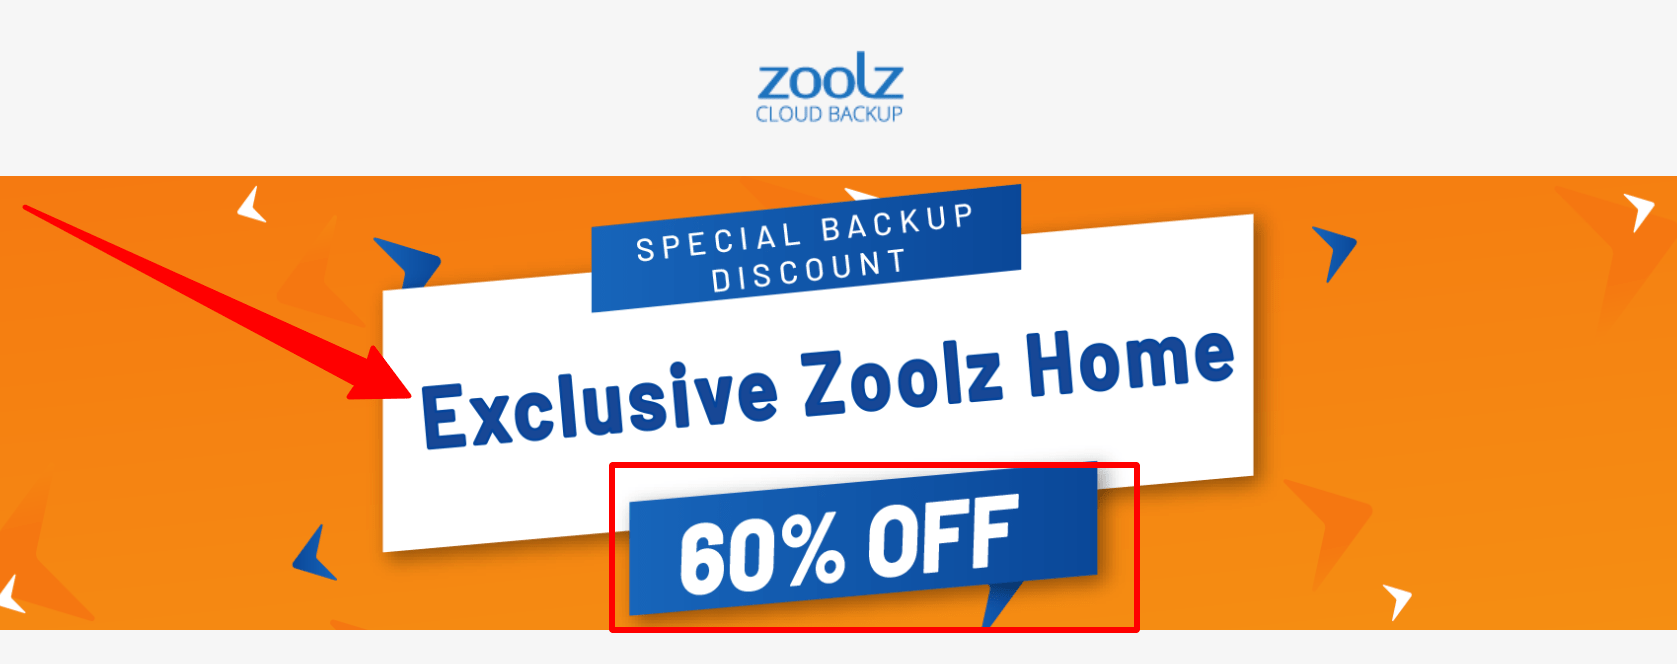 Zoolz-Home-Special-Landing-Page-Zoolz